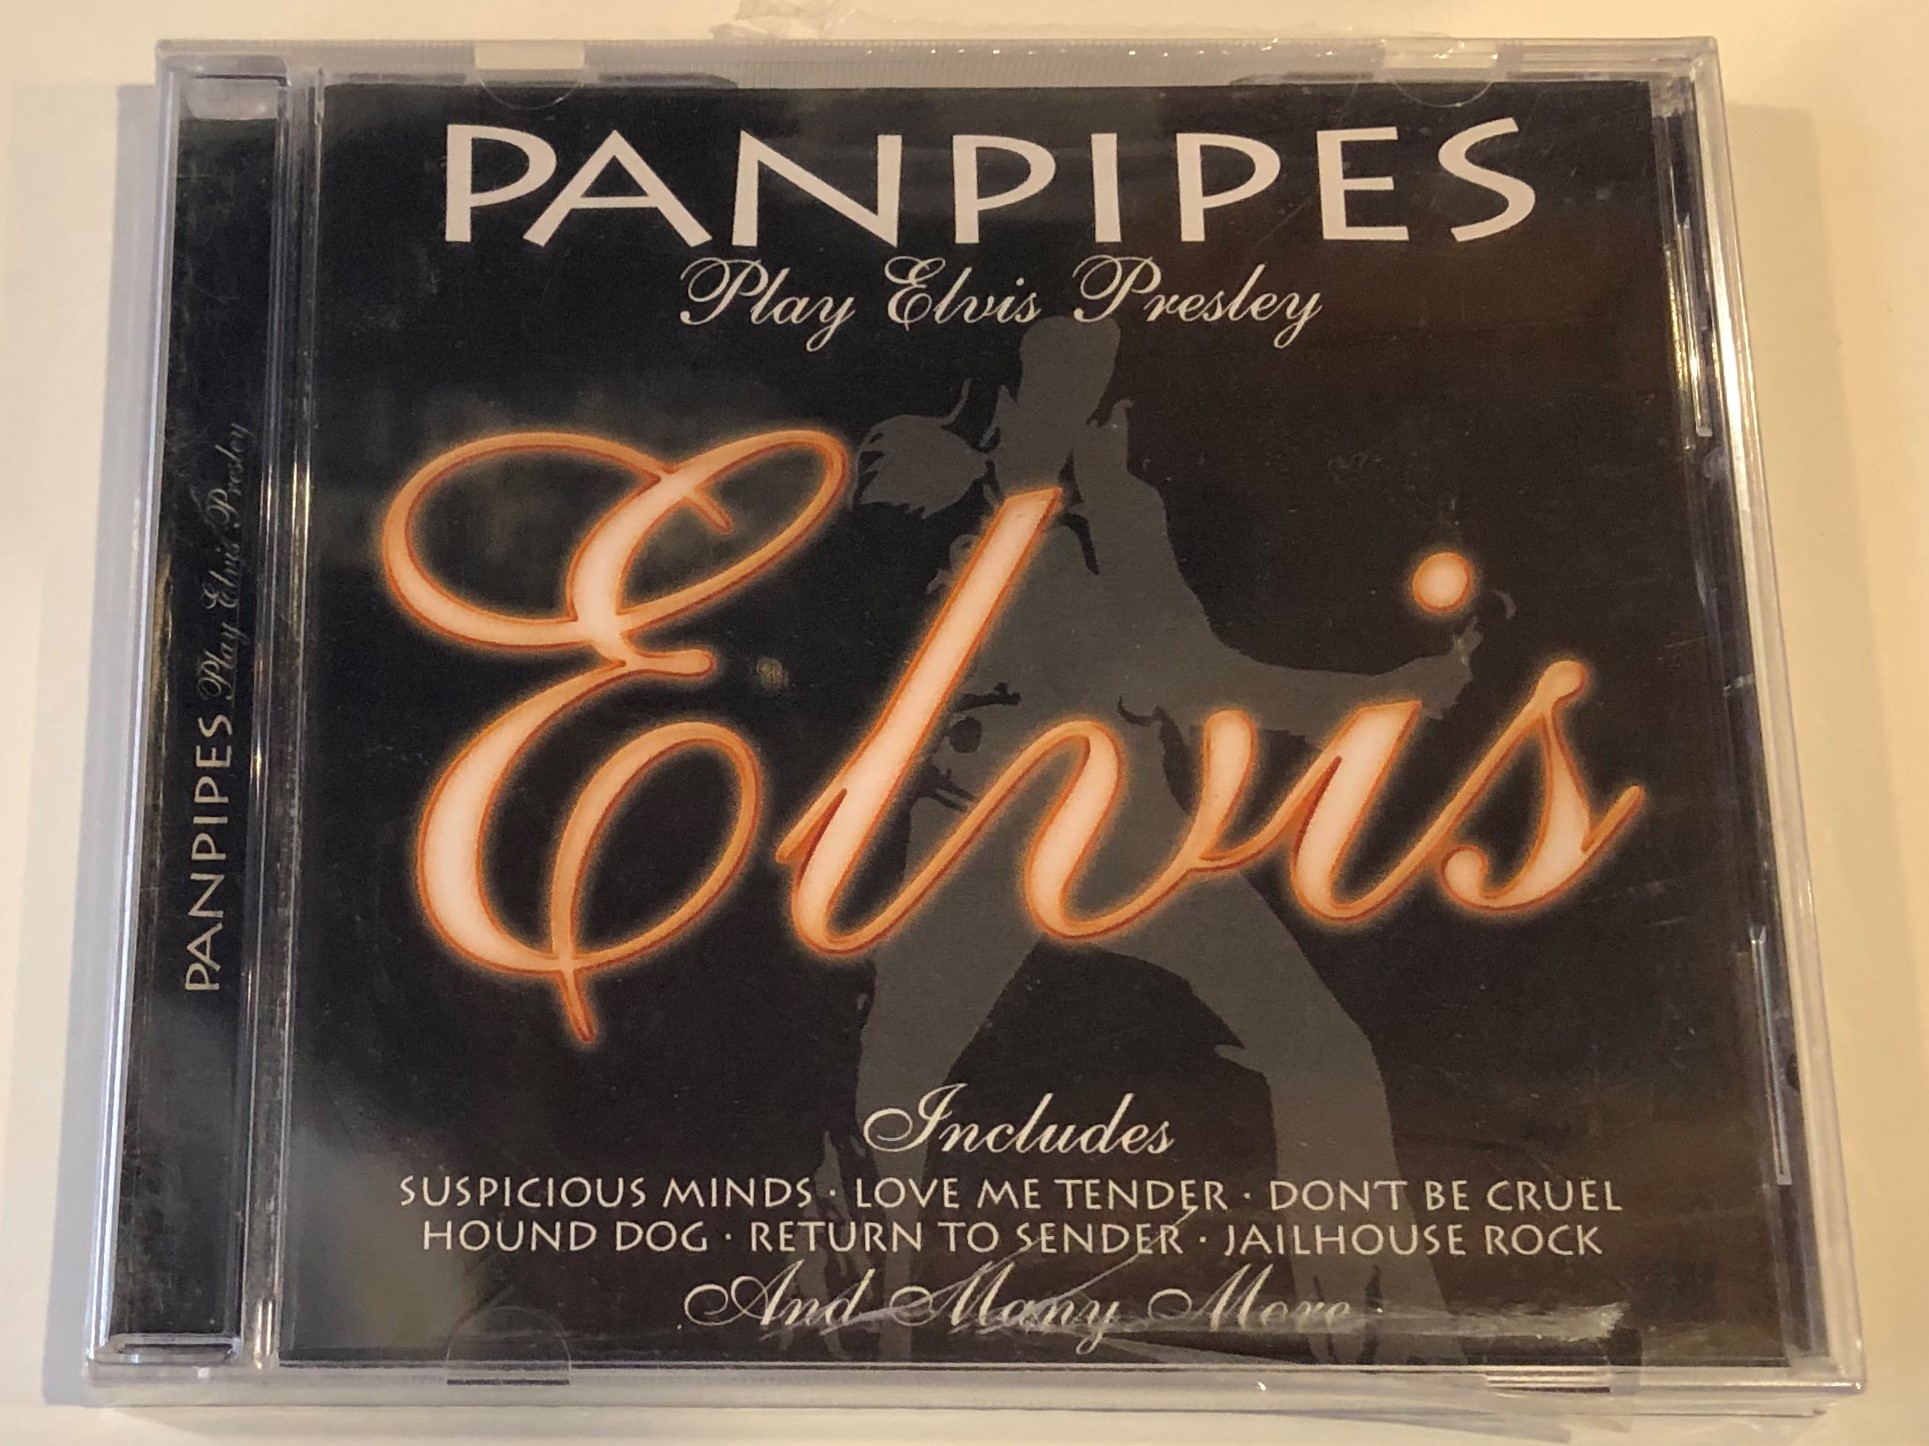 panpipes-play-elvis-presley-elvis-includes-suspicious-minds-love-me-tender-don-t-be-cruel-hound-dog-return-to-sender-jailhouse-rock-and-many-more-music-bank-audio-cd-2002-apwcd1240-1-.jpg